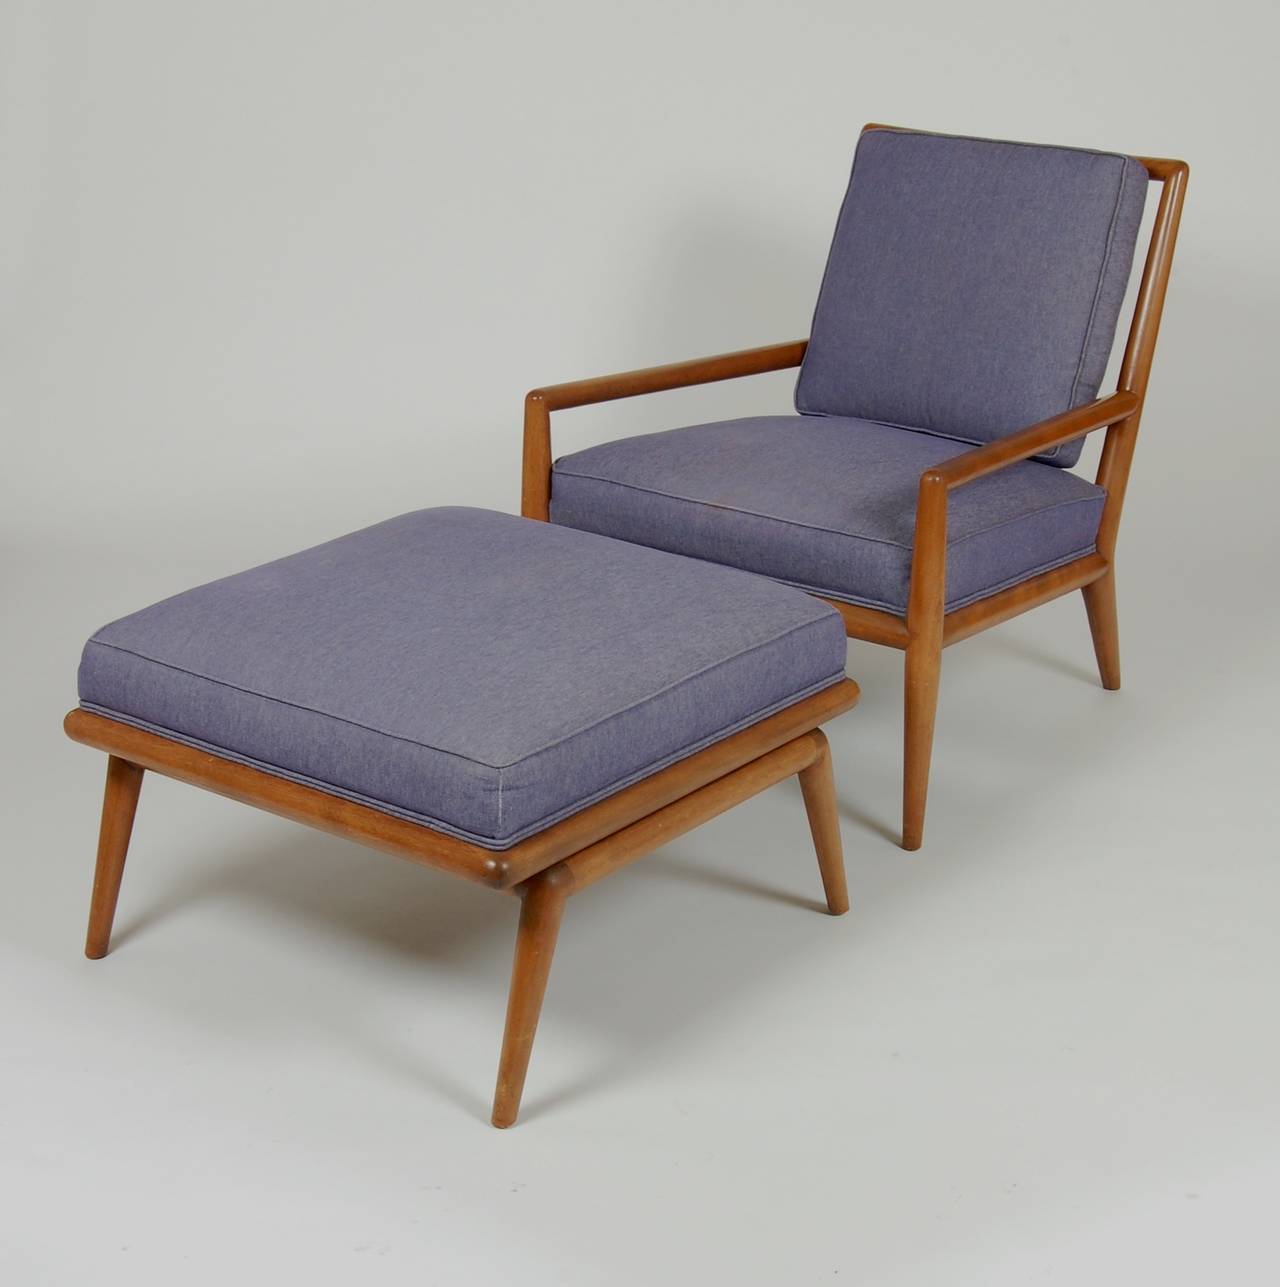 Lounge chair and ottoman by T. H. Robsjohn-Gibbings for Widdicomb, the frame and finish are in excellent vintage condition with a very light patina  and it has been reupholstered at some point . The ottomans dimensions are 16